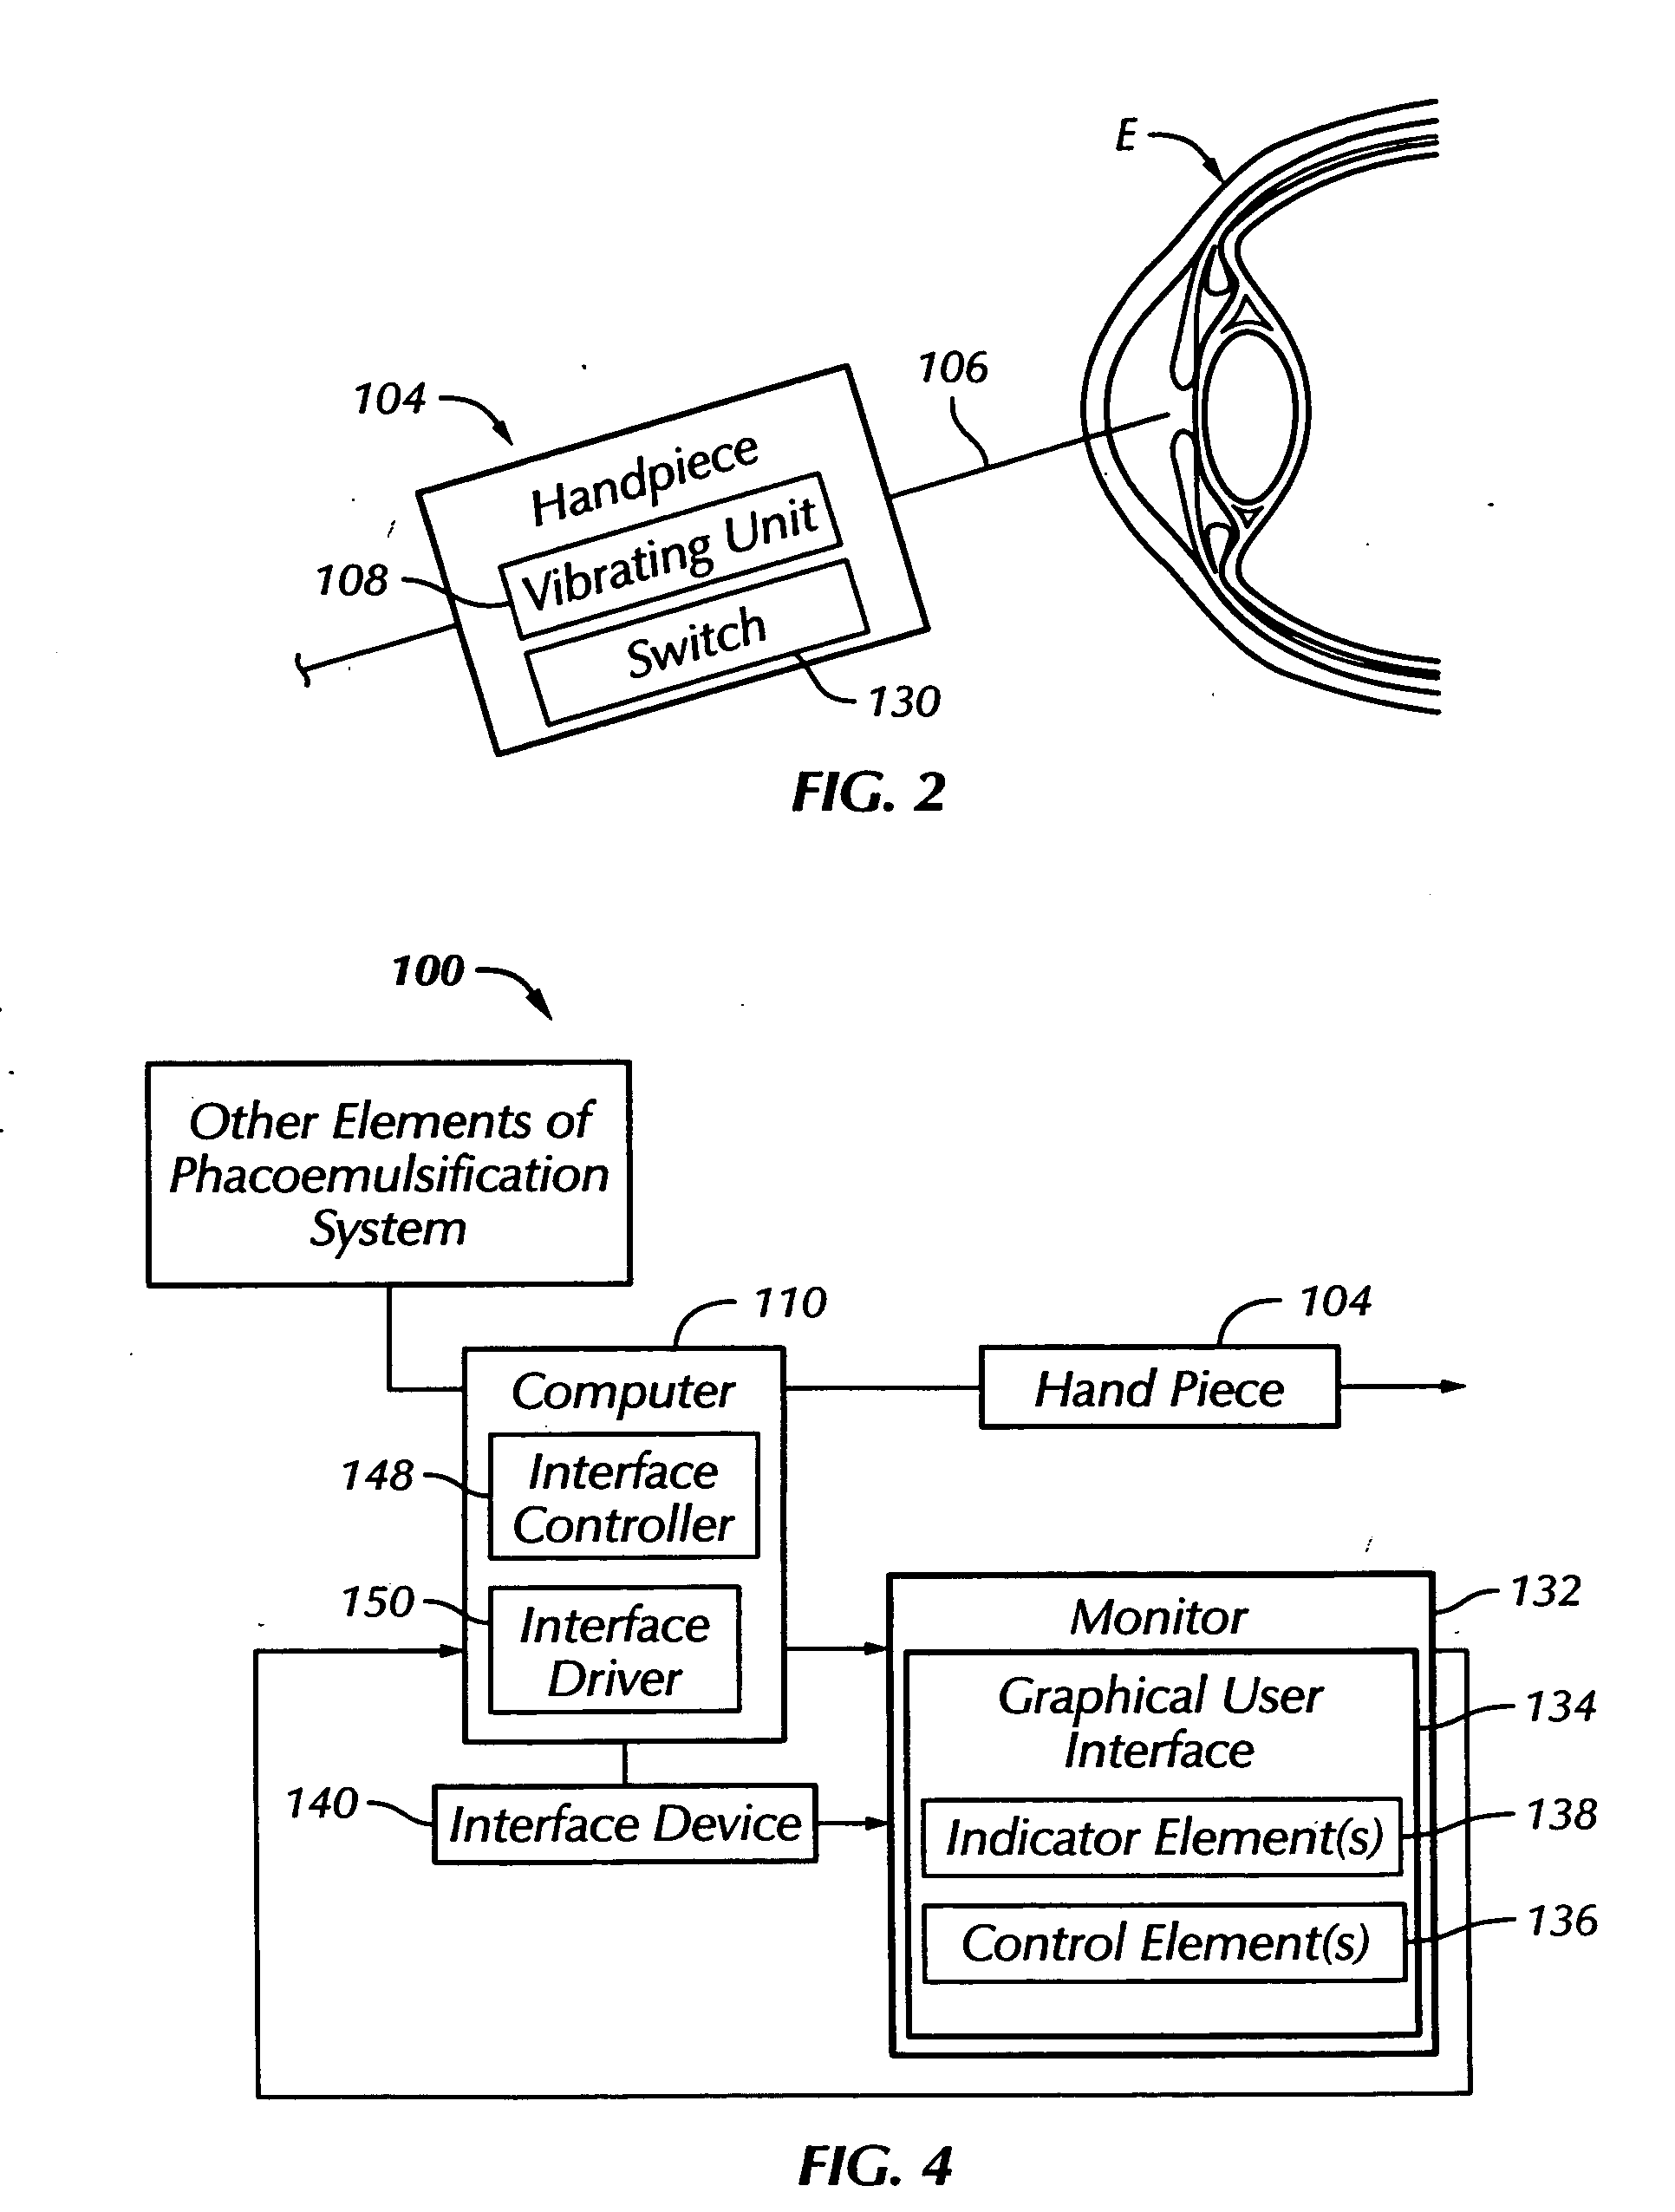 Phacoemulsification system utilizing graphical user interfaces for adjusting pulse parameters